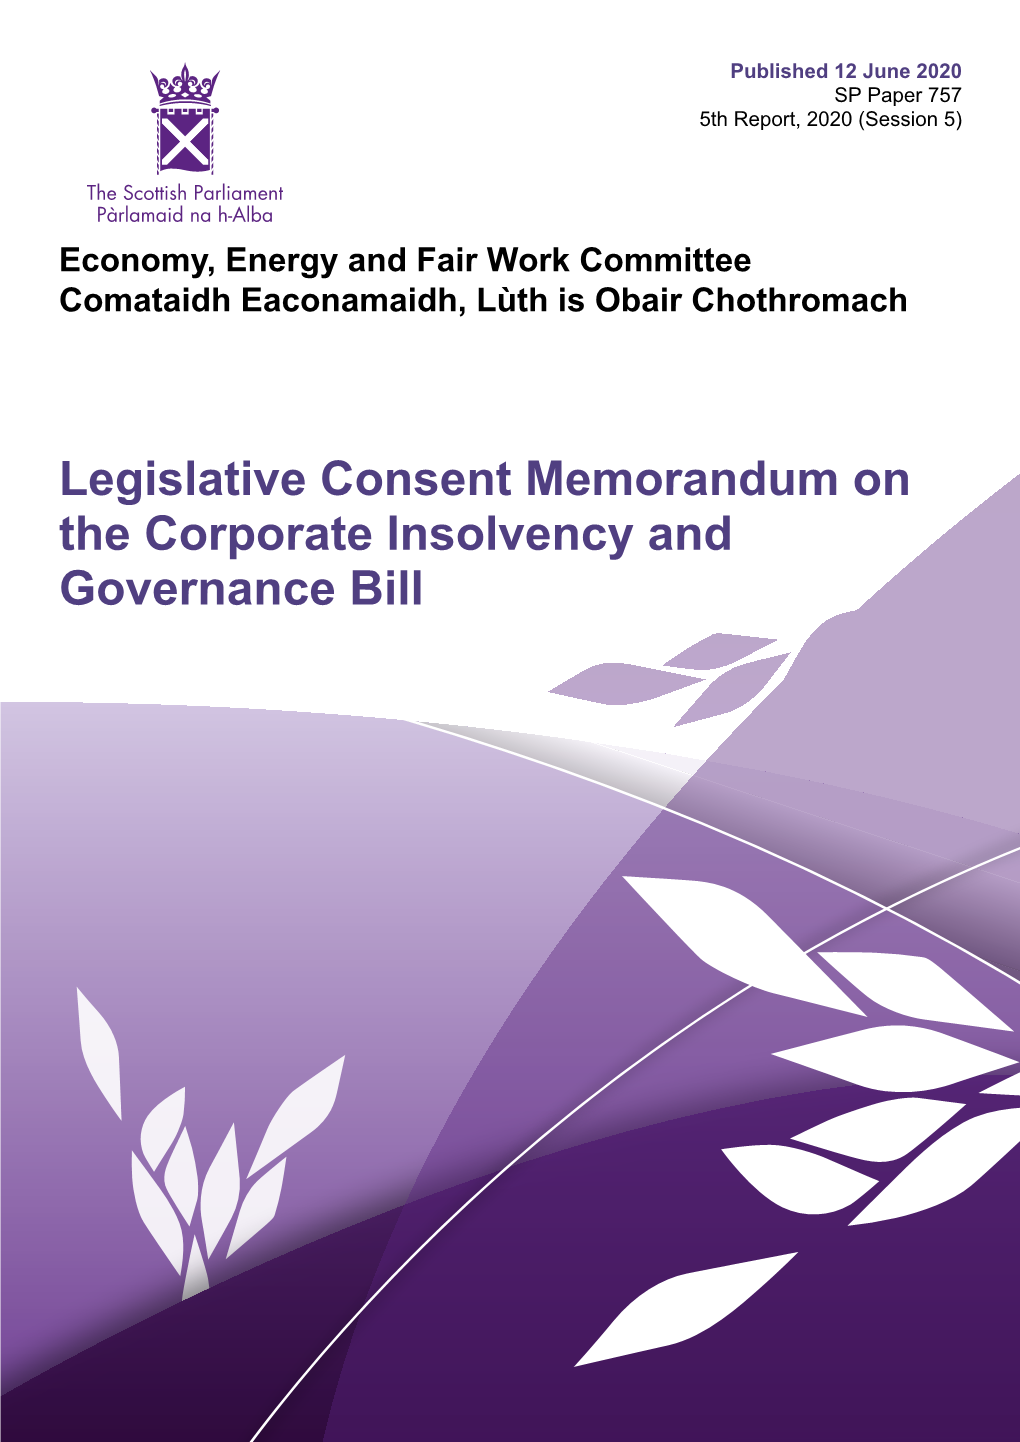 Legislative Consent Memorandum on the Corporate Insolvency and Governance Bill Published in Scotland by the Scottish Parliamentary Corporate Body